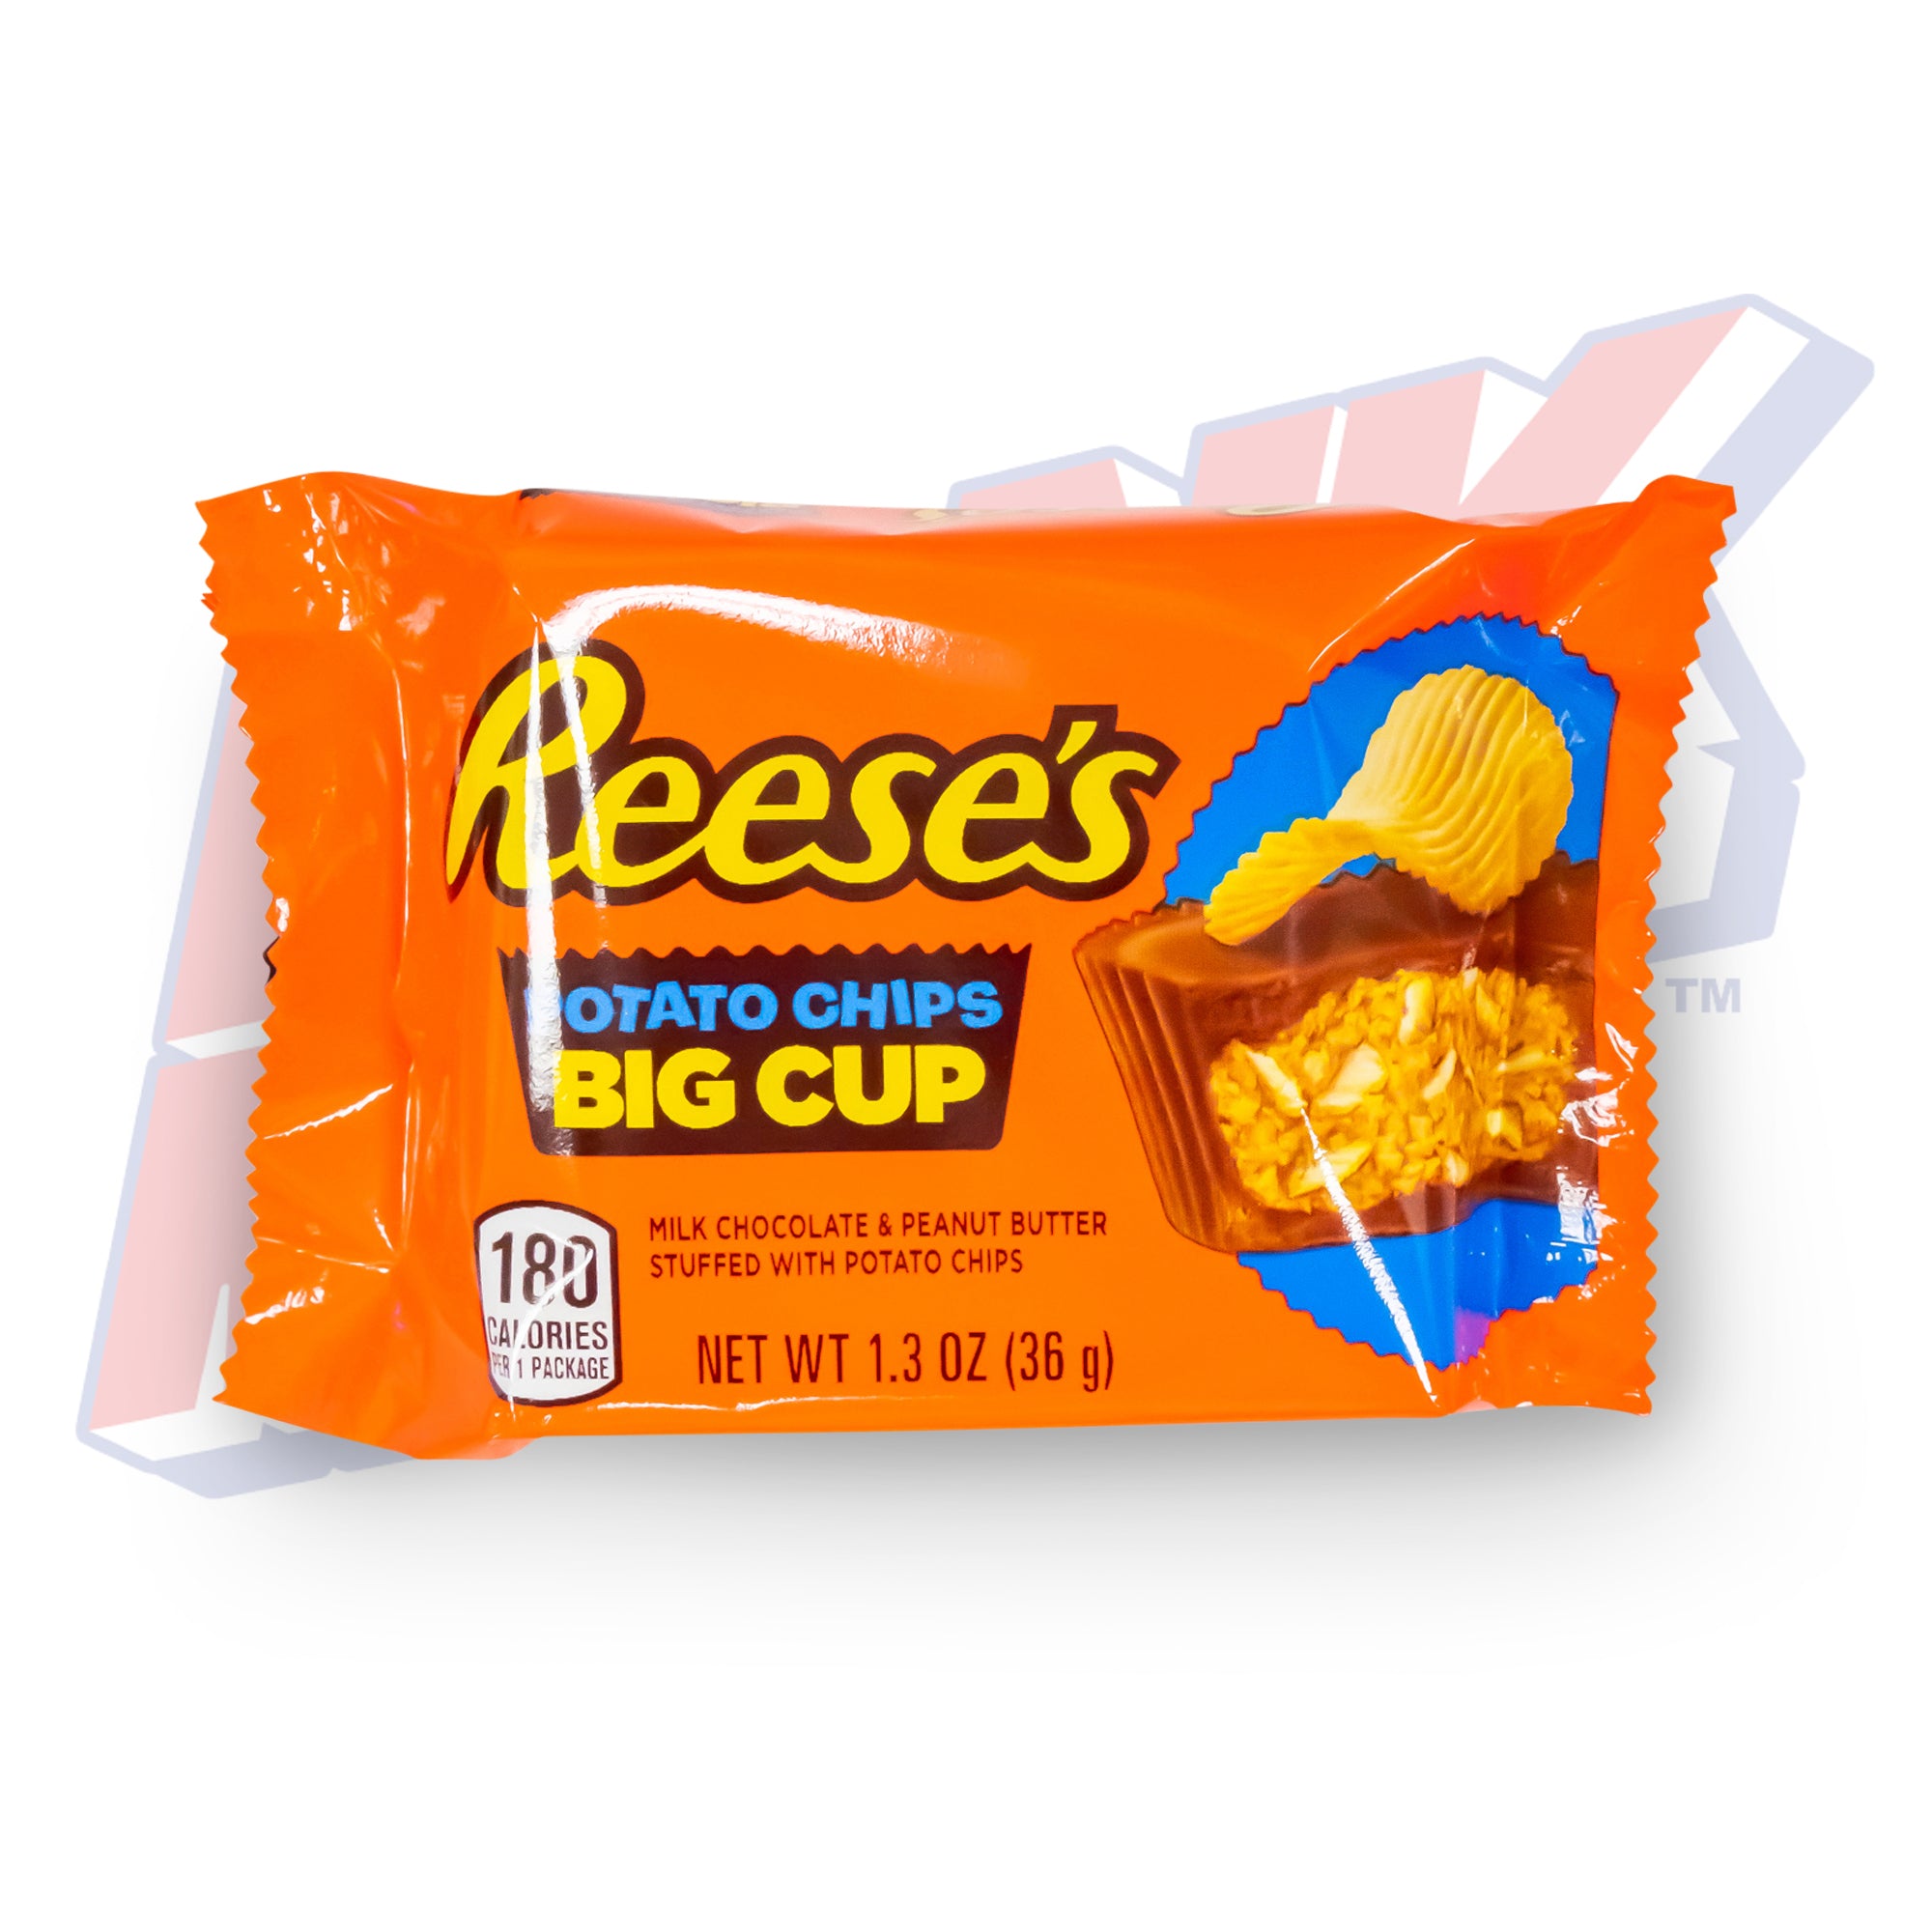 Reese's Big Cup Potato Chips - 73g